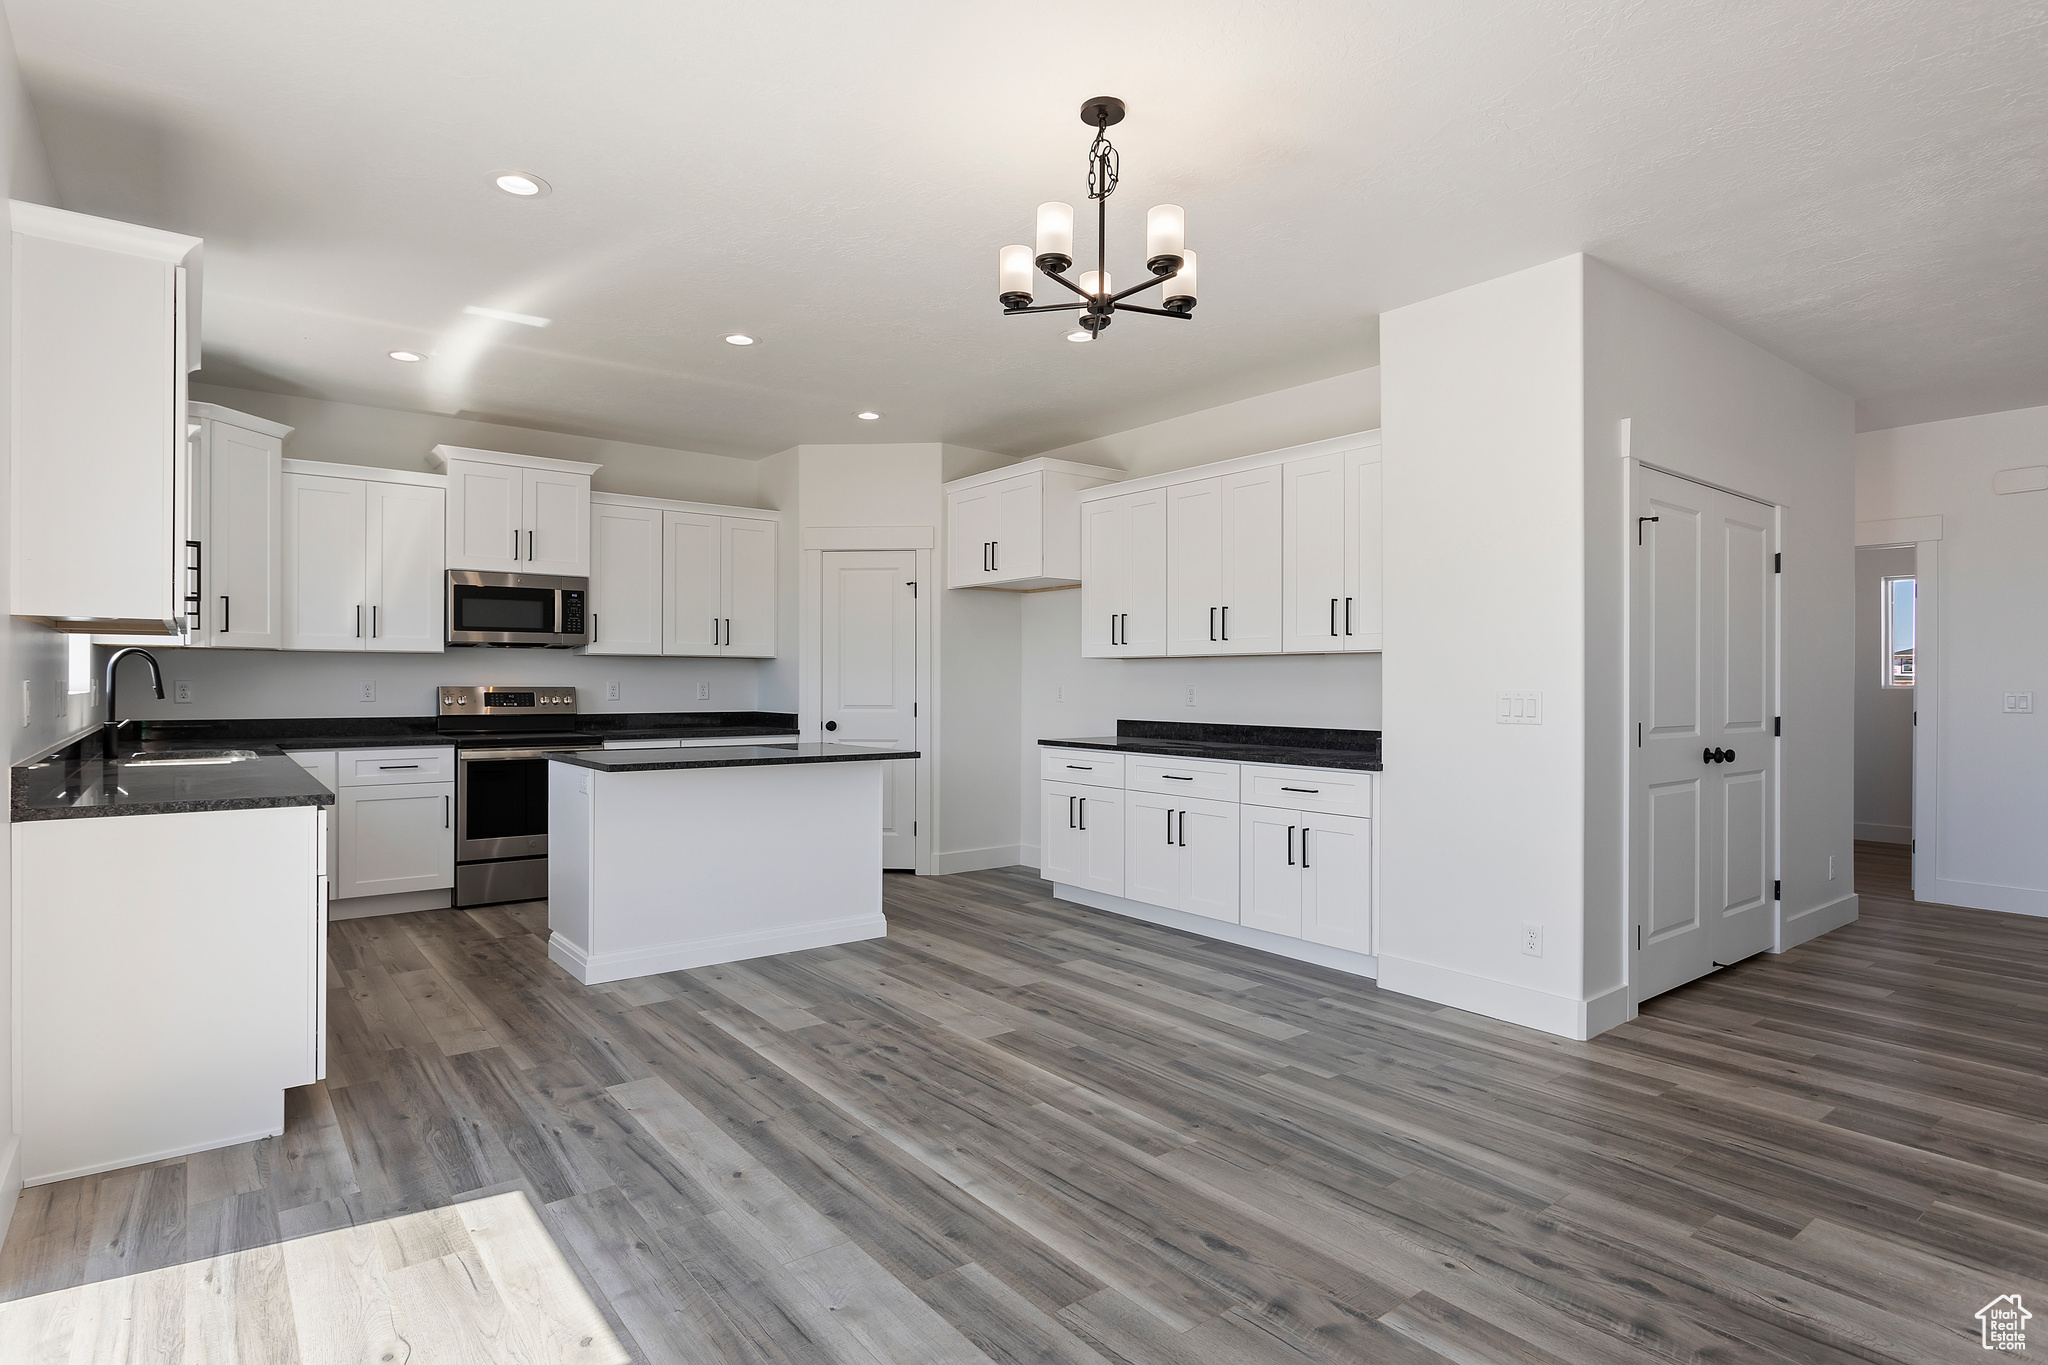 Kitchen with appliances with stainless steel finishes, white cabinets, sink, hanging light fixtures, and wood-type flooring